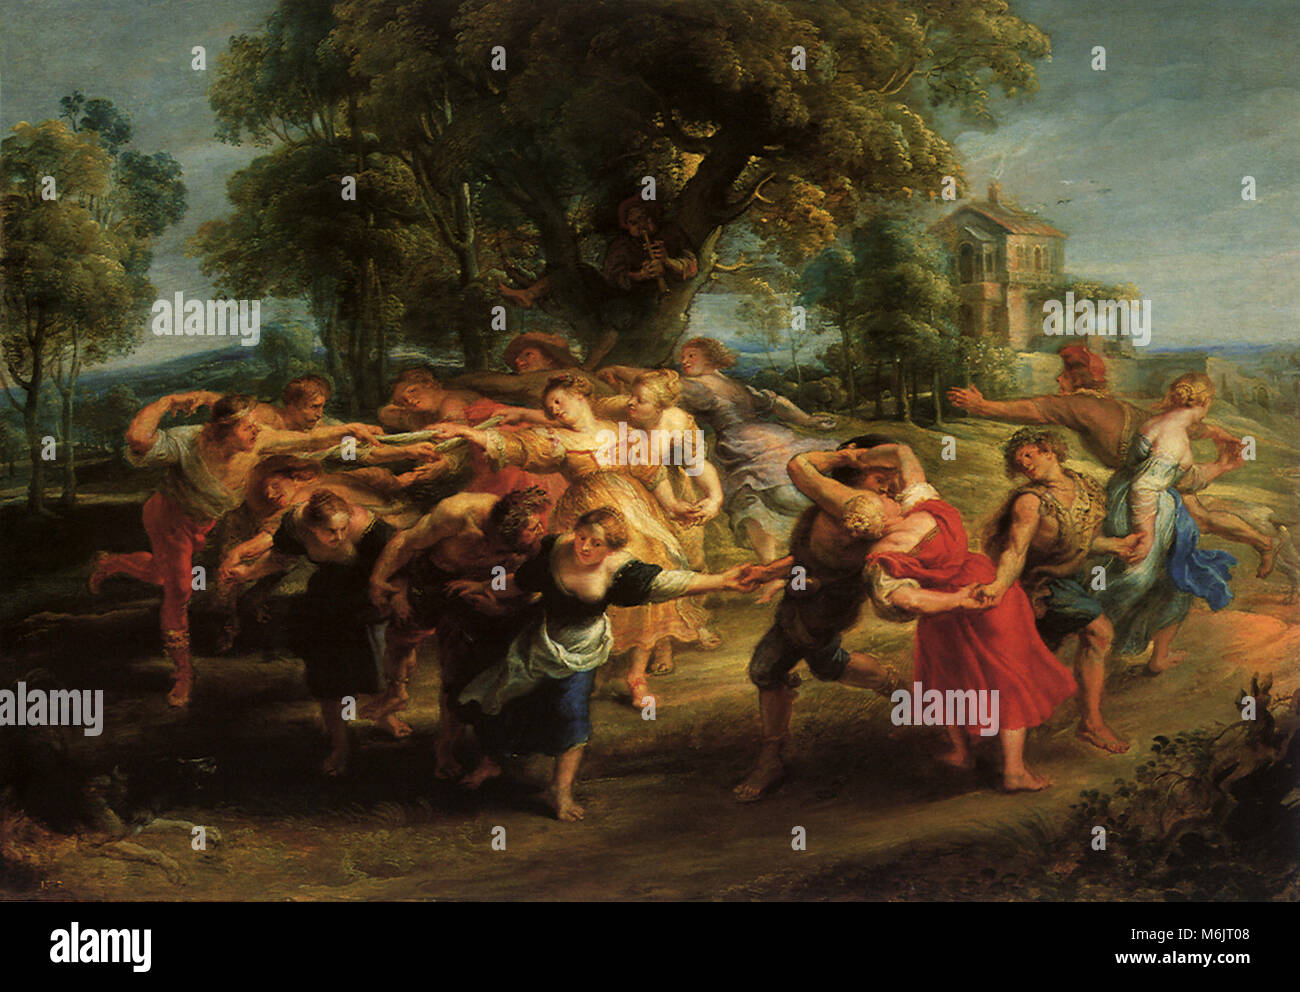 Dance of the Villagers, Rubens, Peter Paul, 1636. Stock Photo